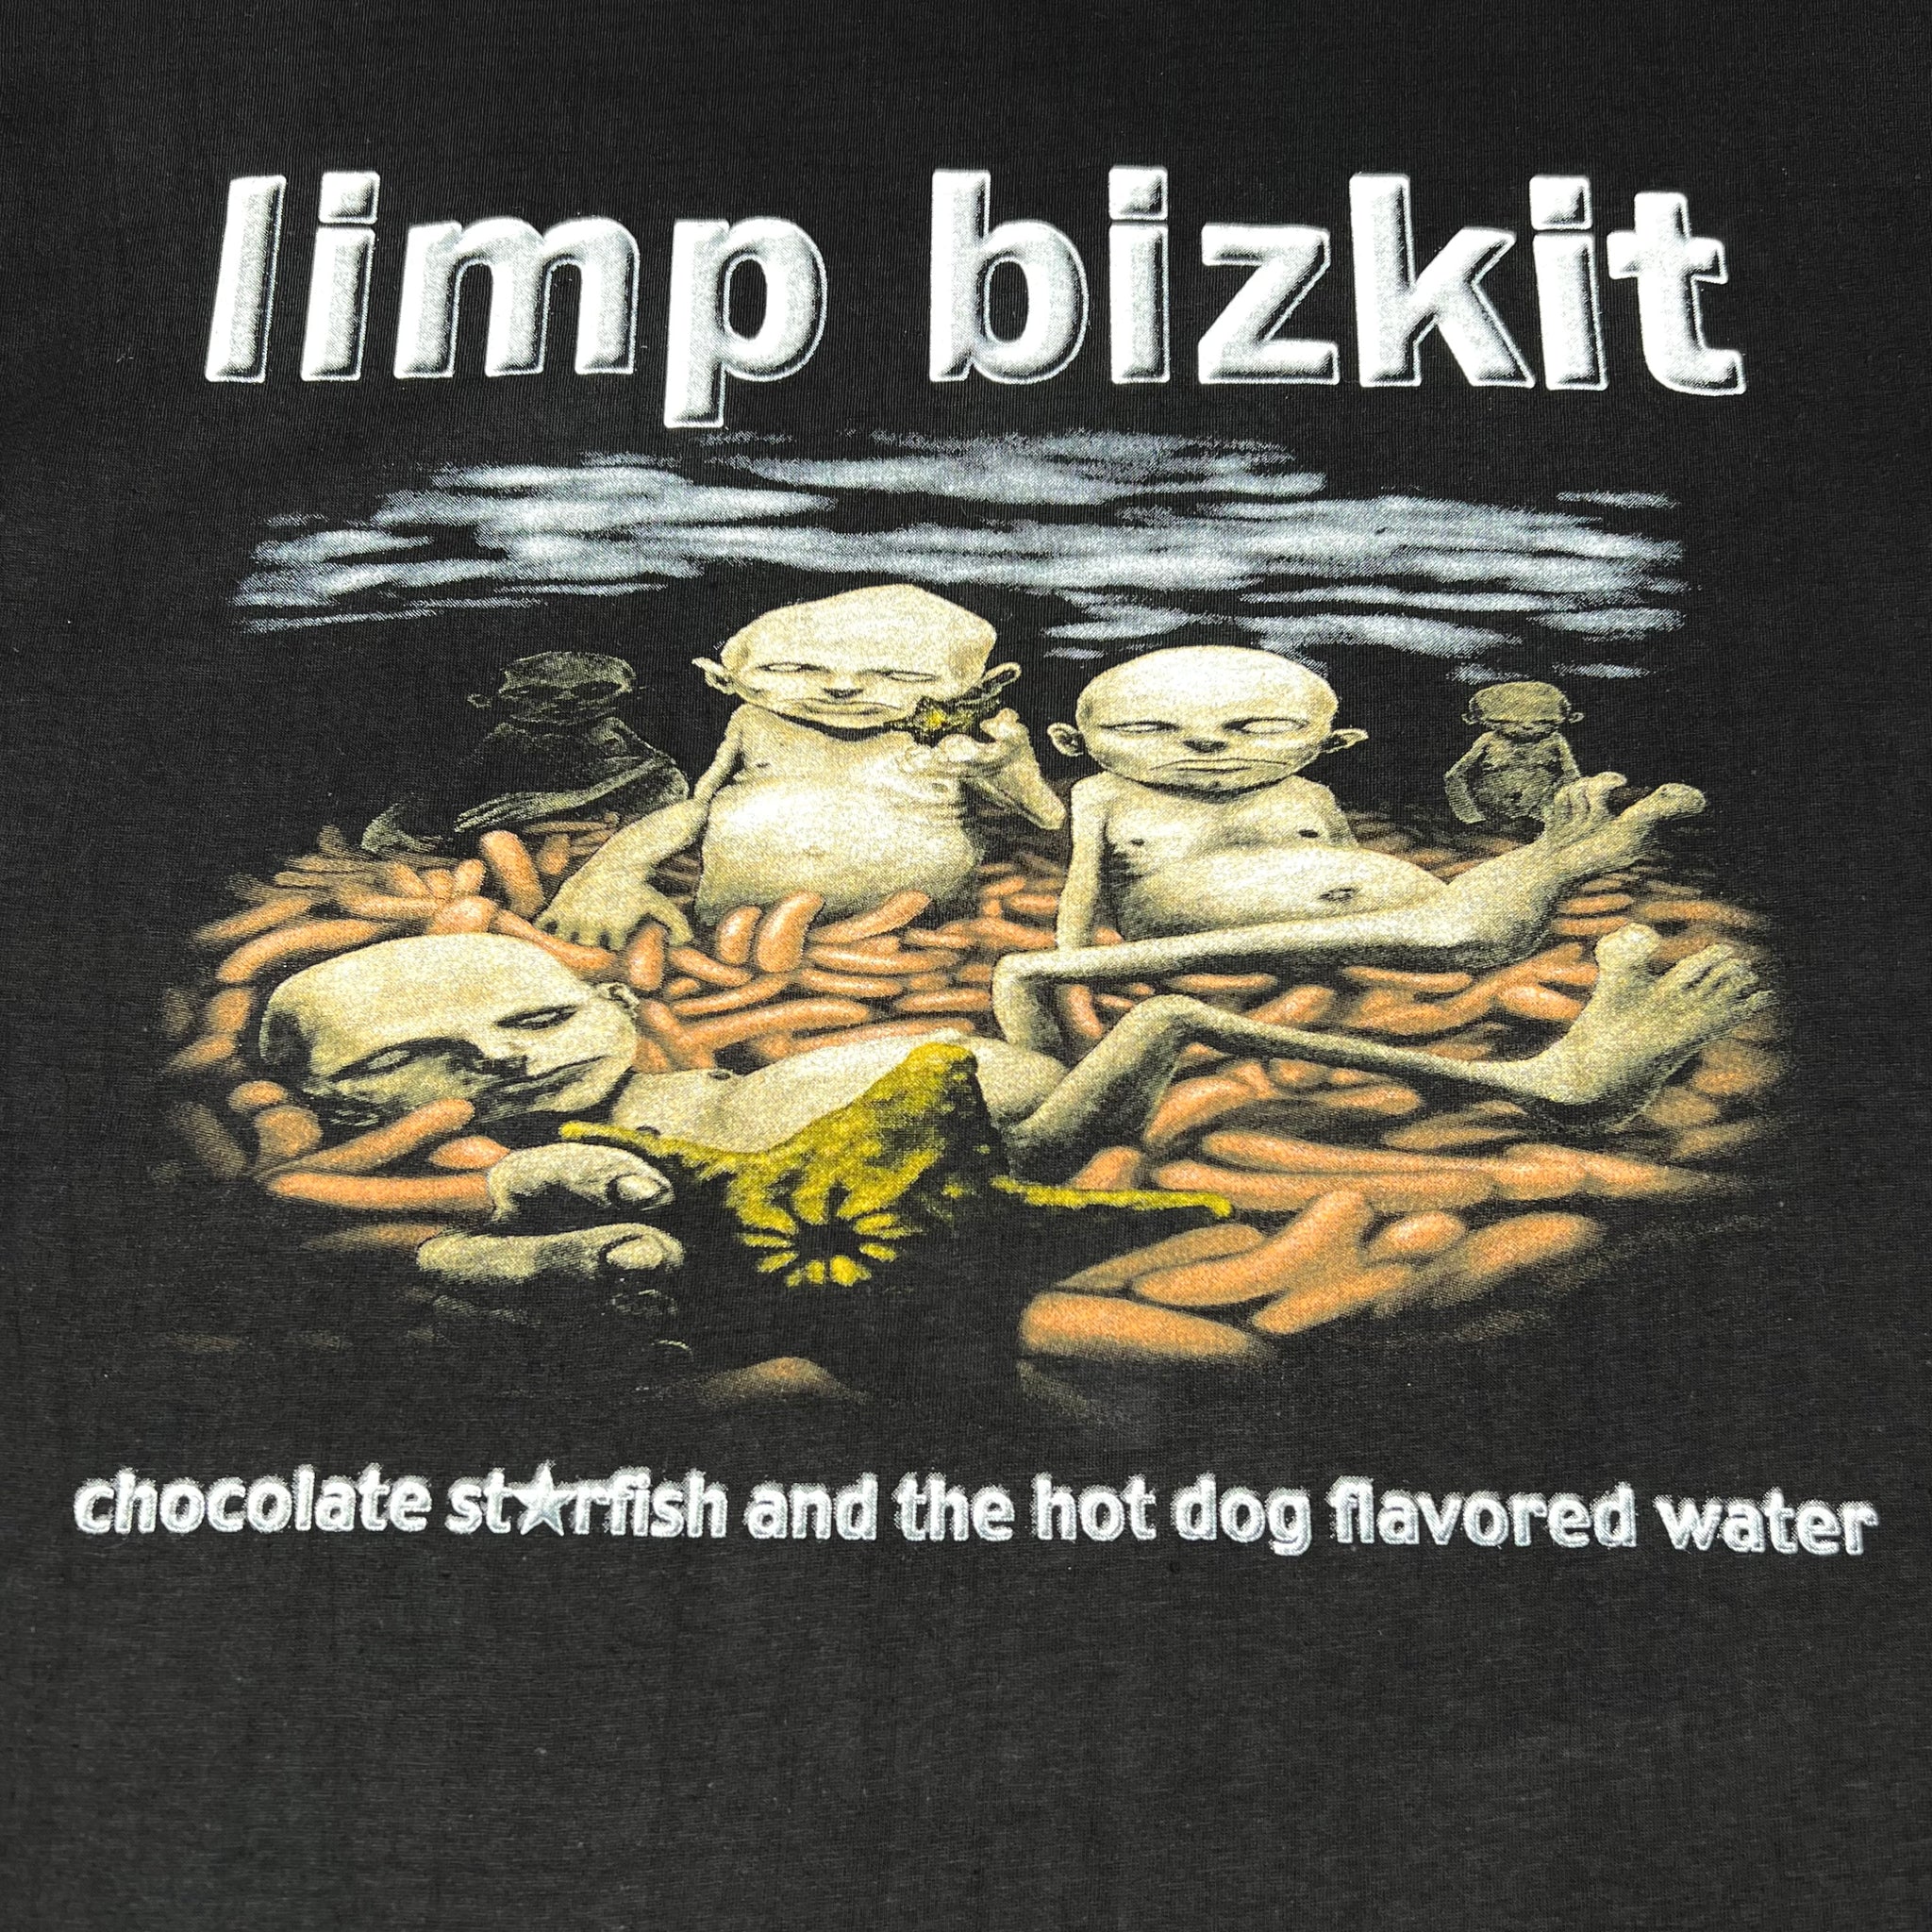 LIMP BIZKIT | ‘Chocolate Starfish and the Hot Dog Flavored Water’ | 2000 | XL